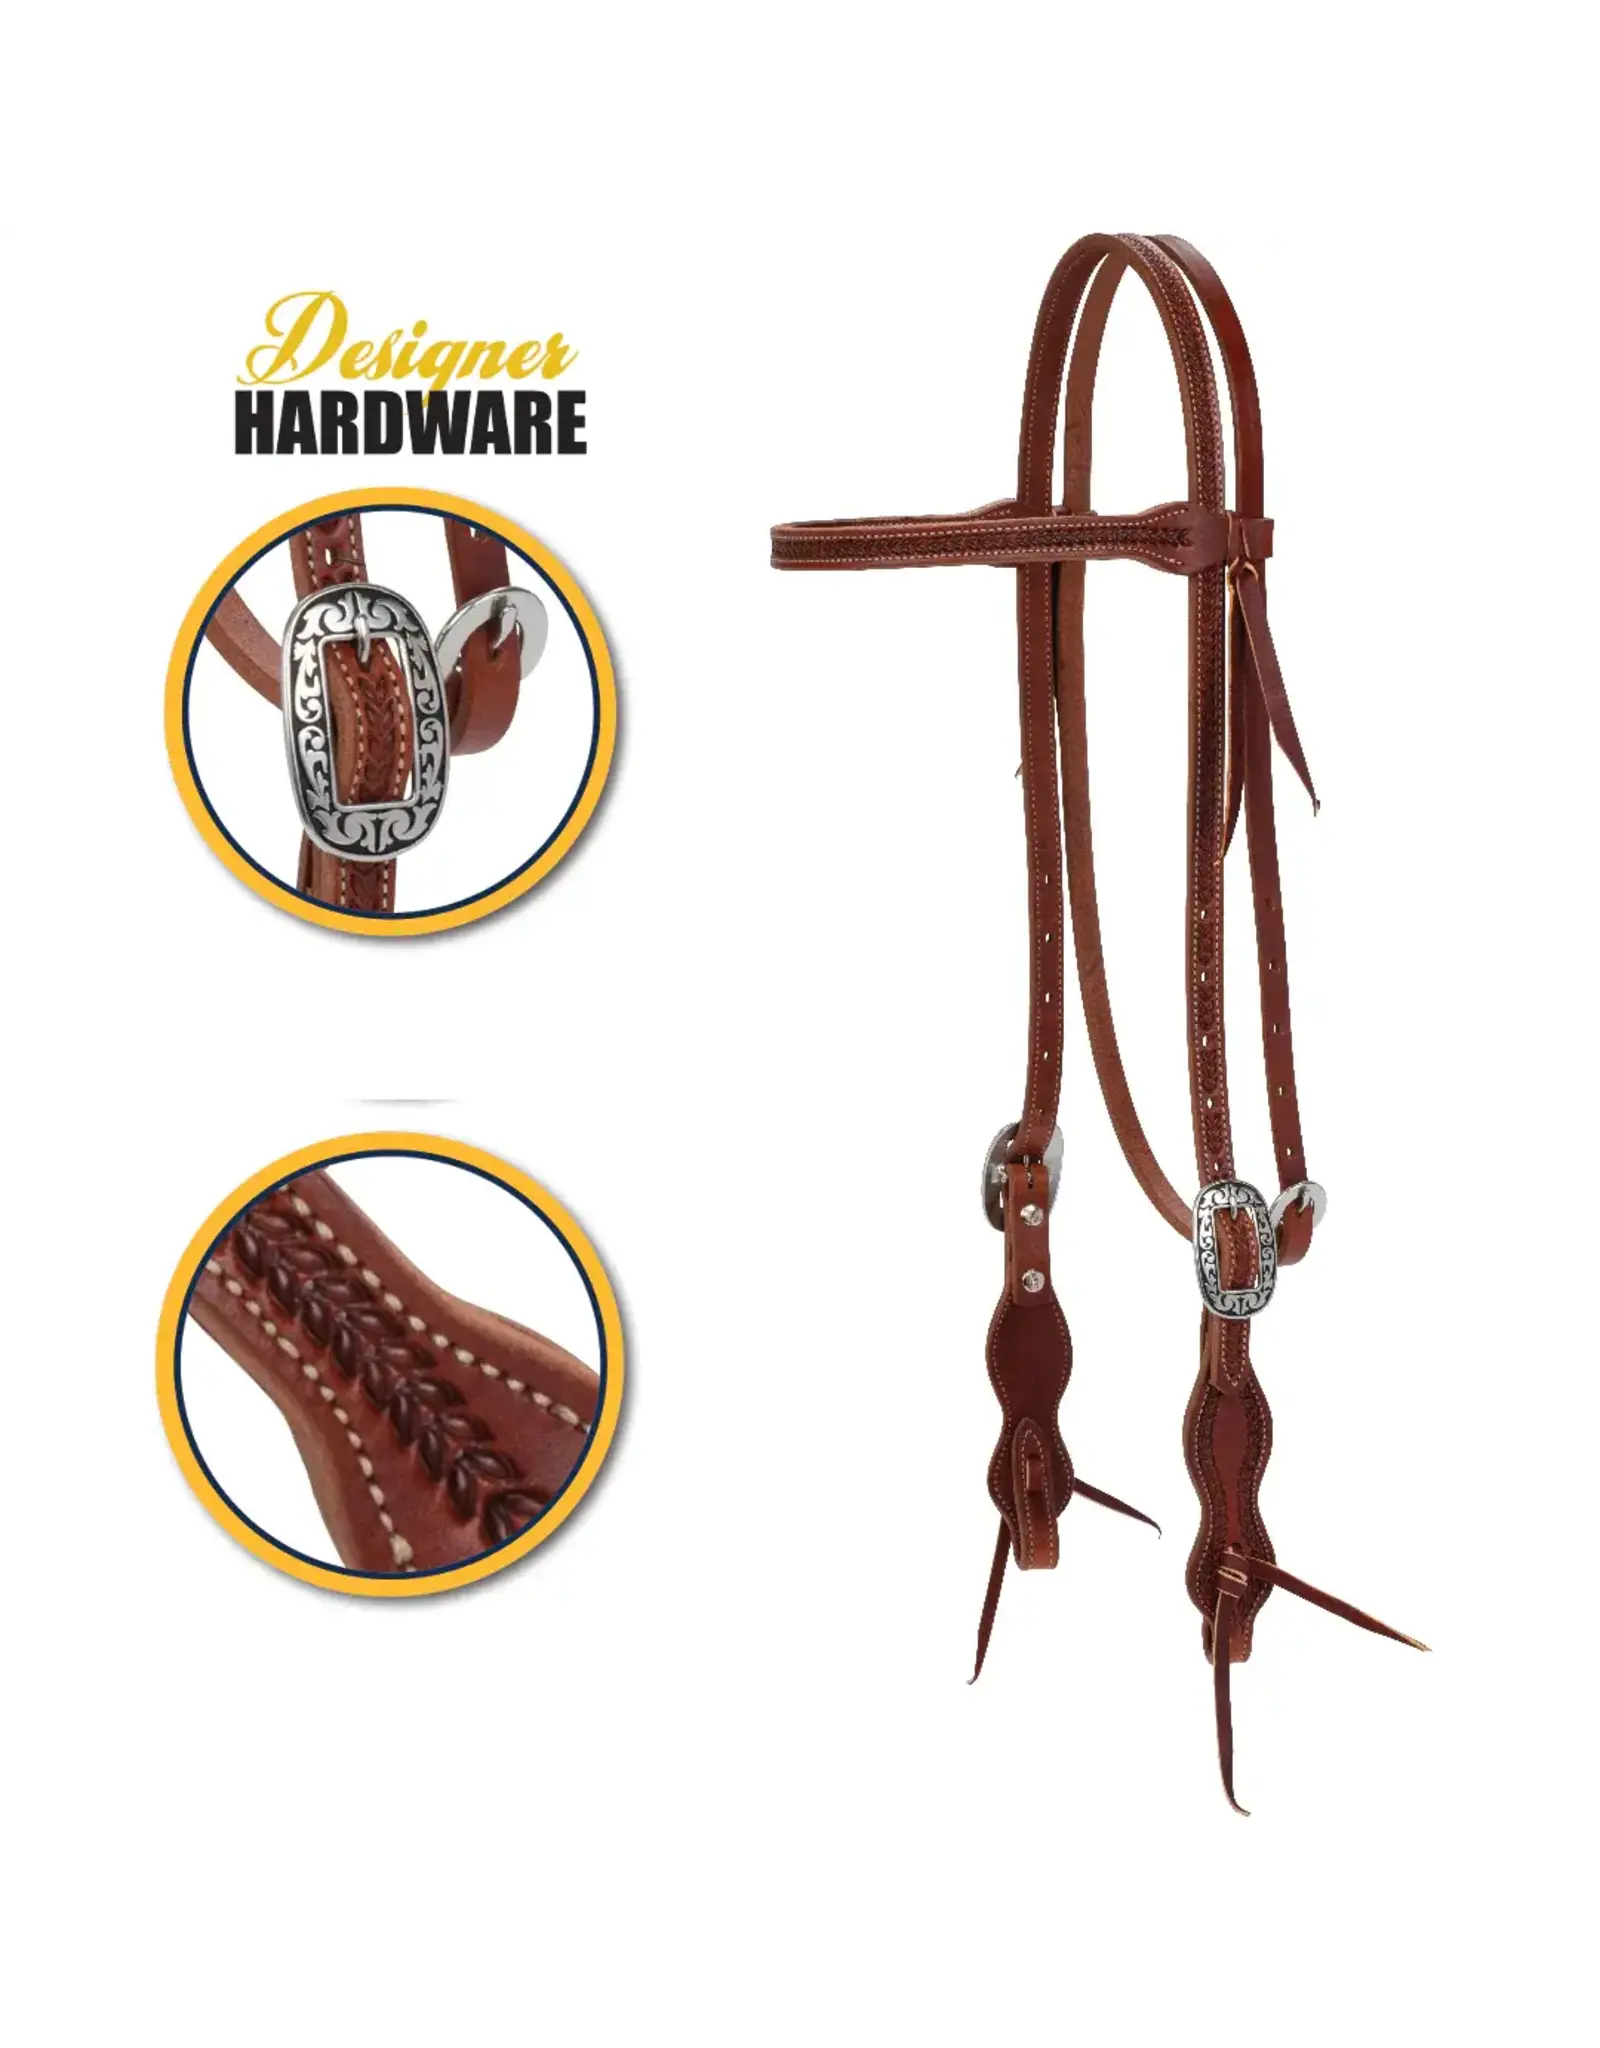 SYNERGY® HARVEST WHEAT HEADSTALL WITH FLORAL DESIGNER HARDWARE- Straight Brow - 10018-10-00-02